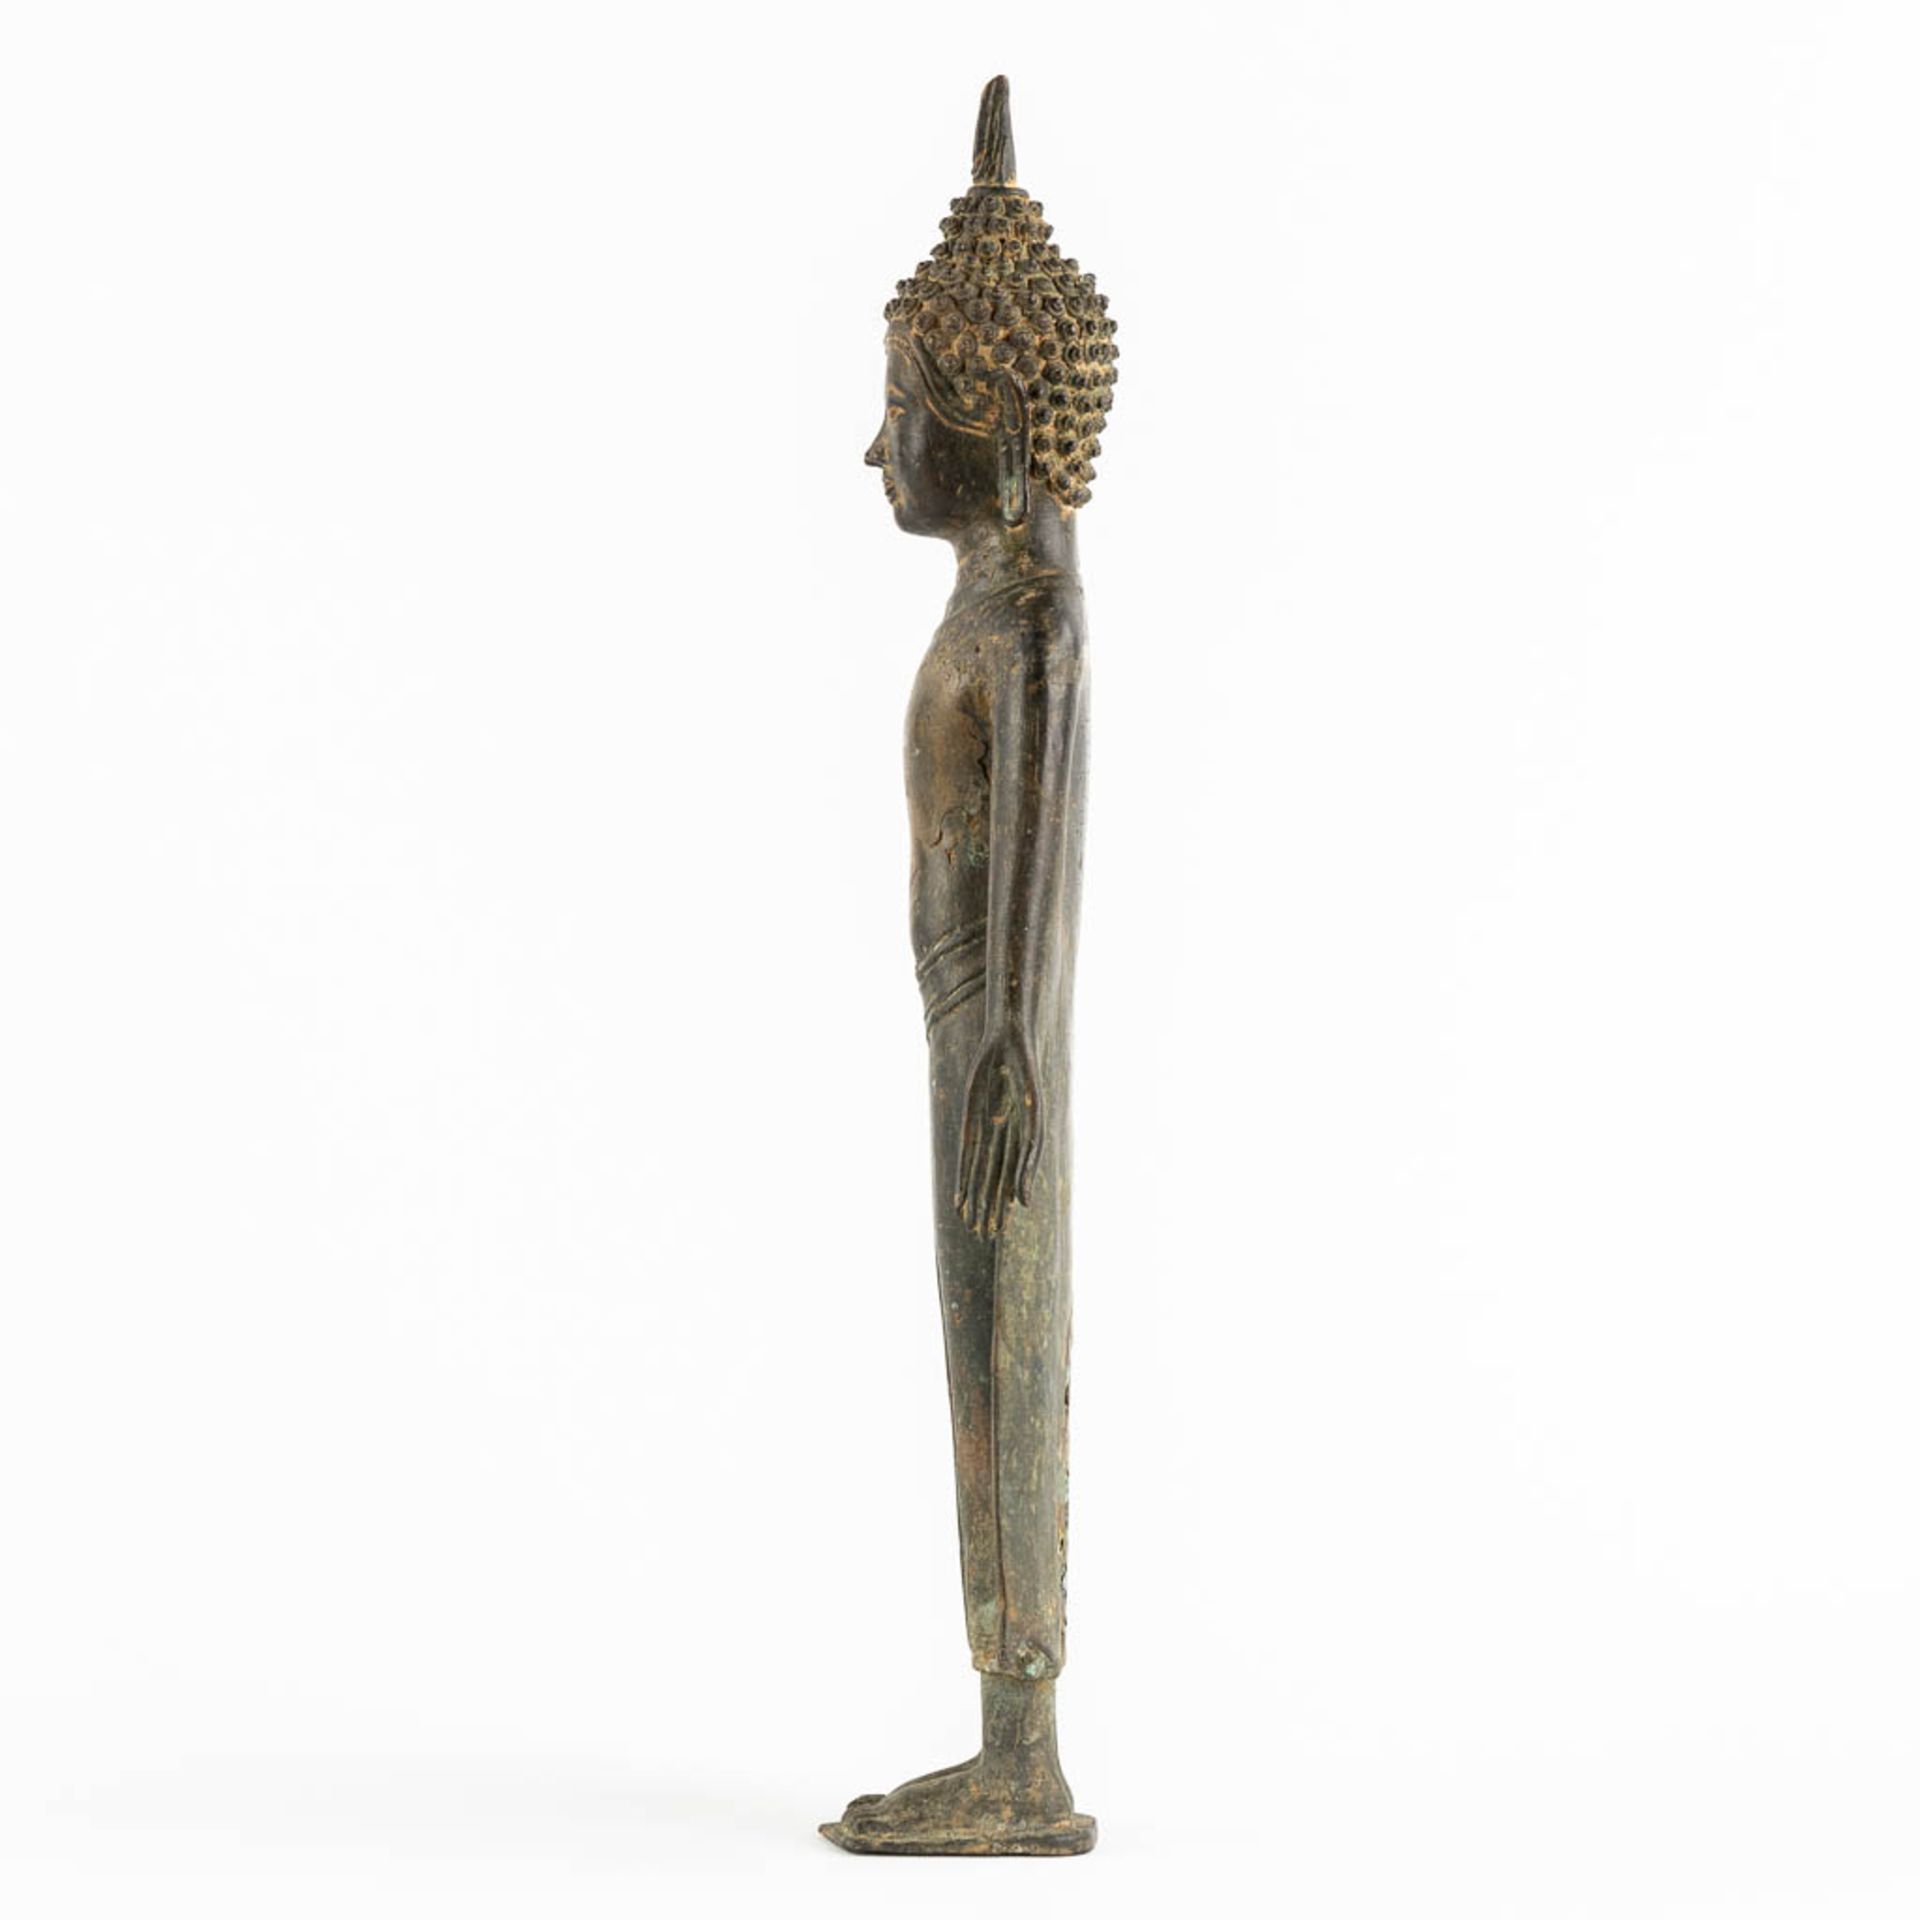 A Thai figurine of a standing Buddha, Patinated bronze. (W:16 x H:44 cm) - Image 6 of 10